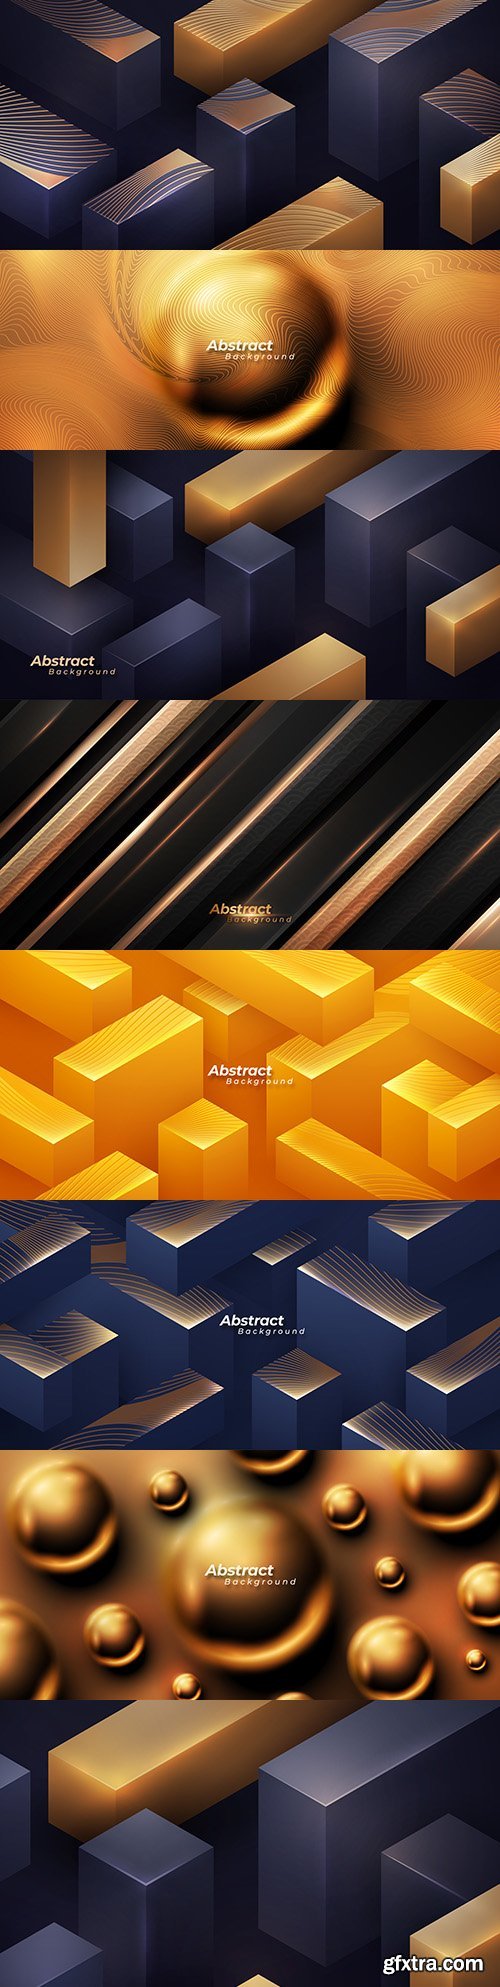 Golden abstract flickering balls and geometric background